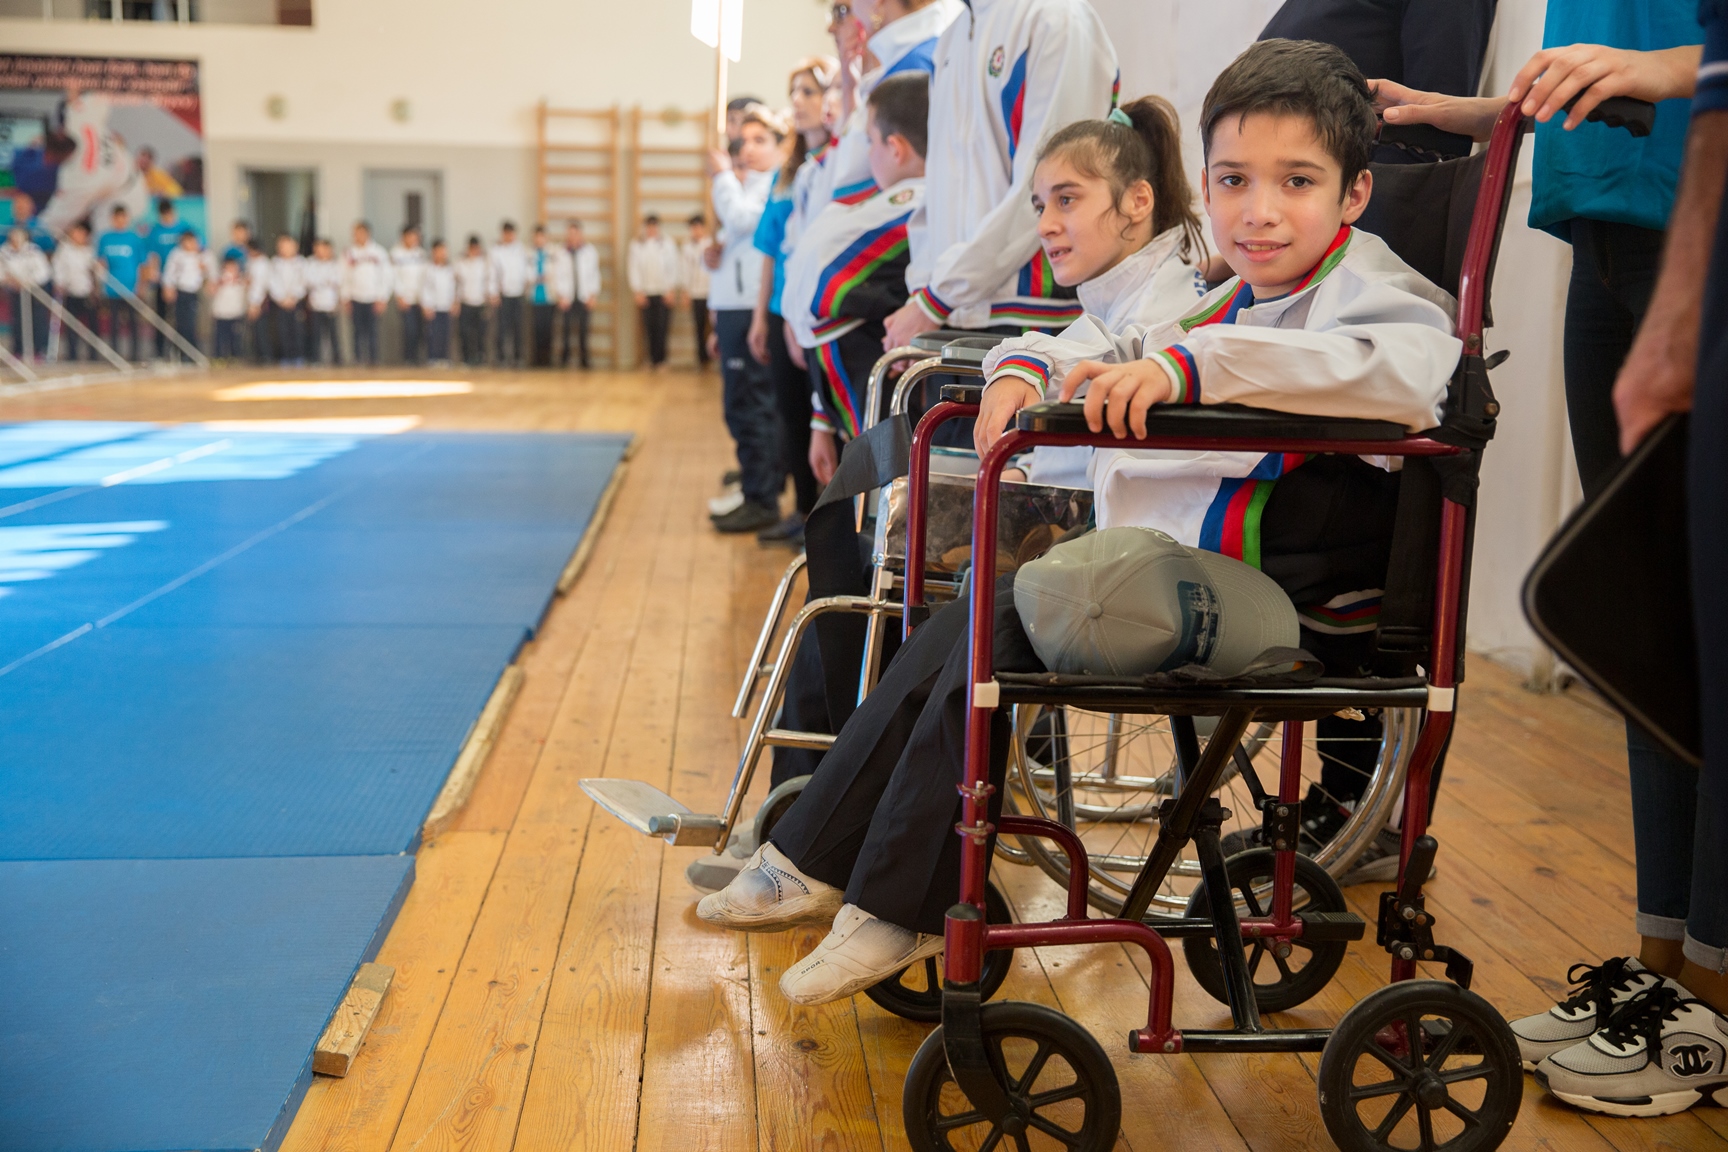 II Children’s Paralympic Games supported by Azercell ends